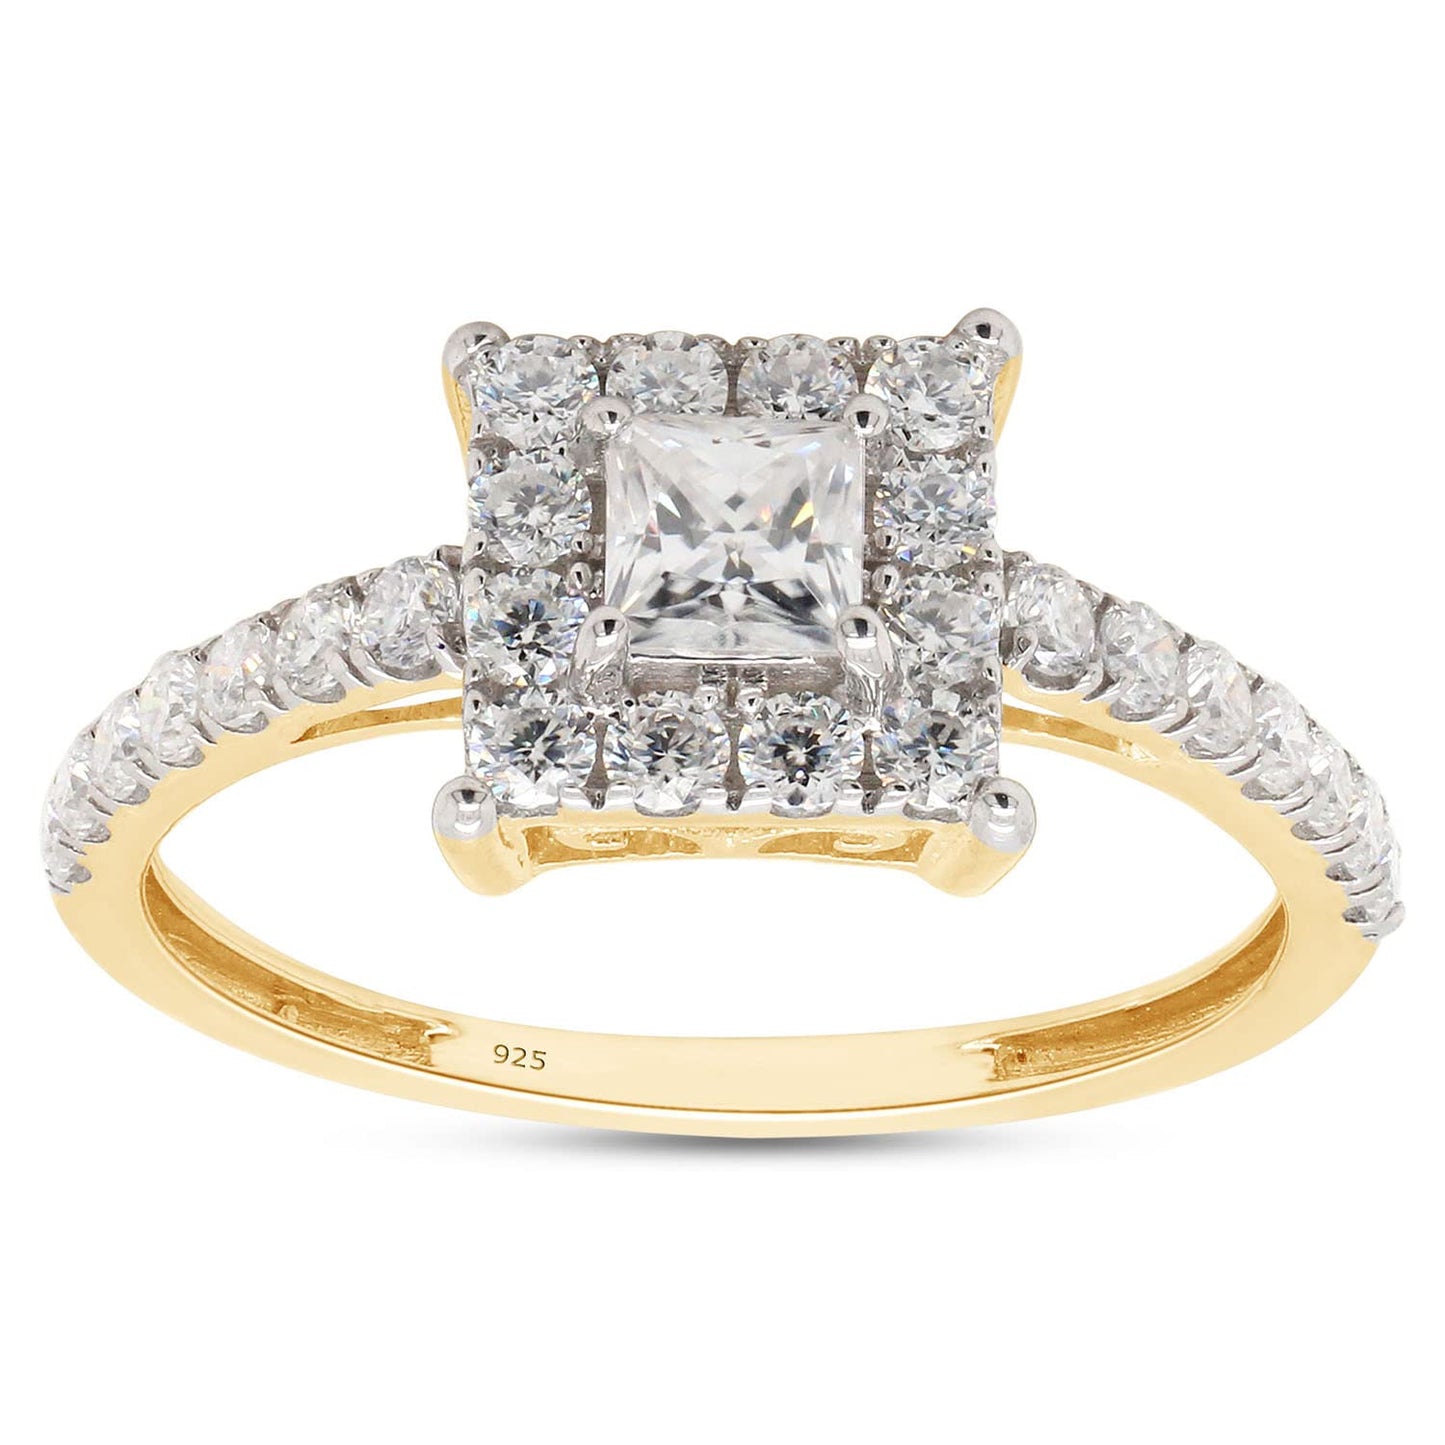 0.75 Carat Princess and Round Cut Lab Created Moissanite Diamond Square Halo Engagement Ring in 925 Sterling Silver